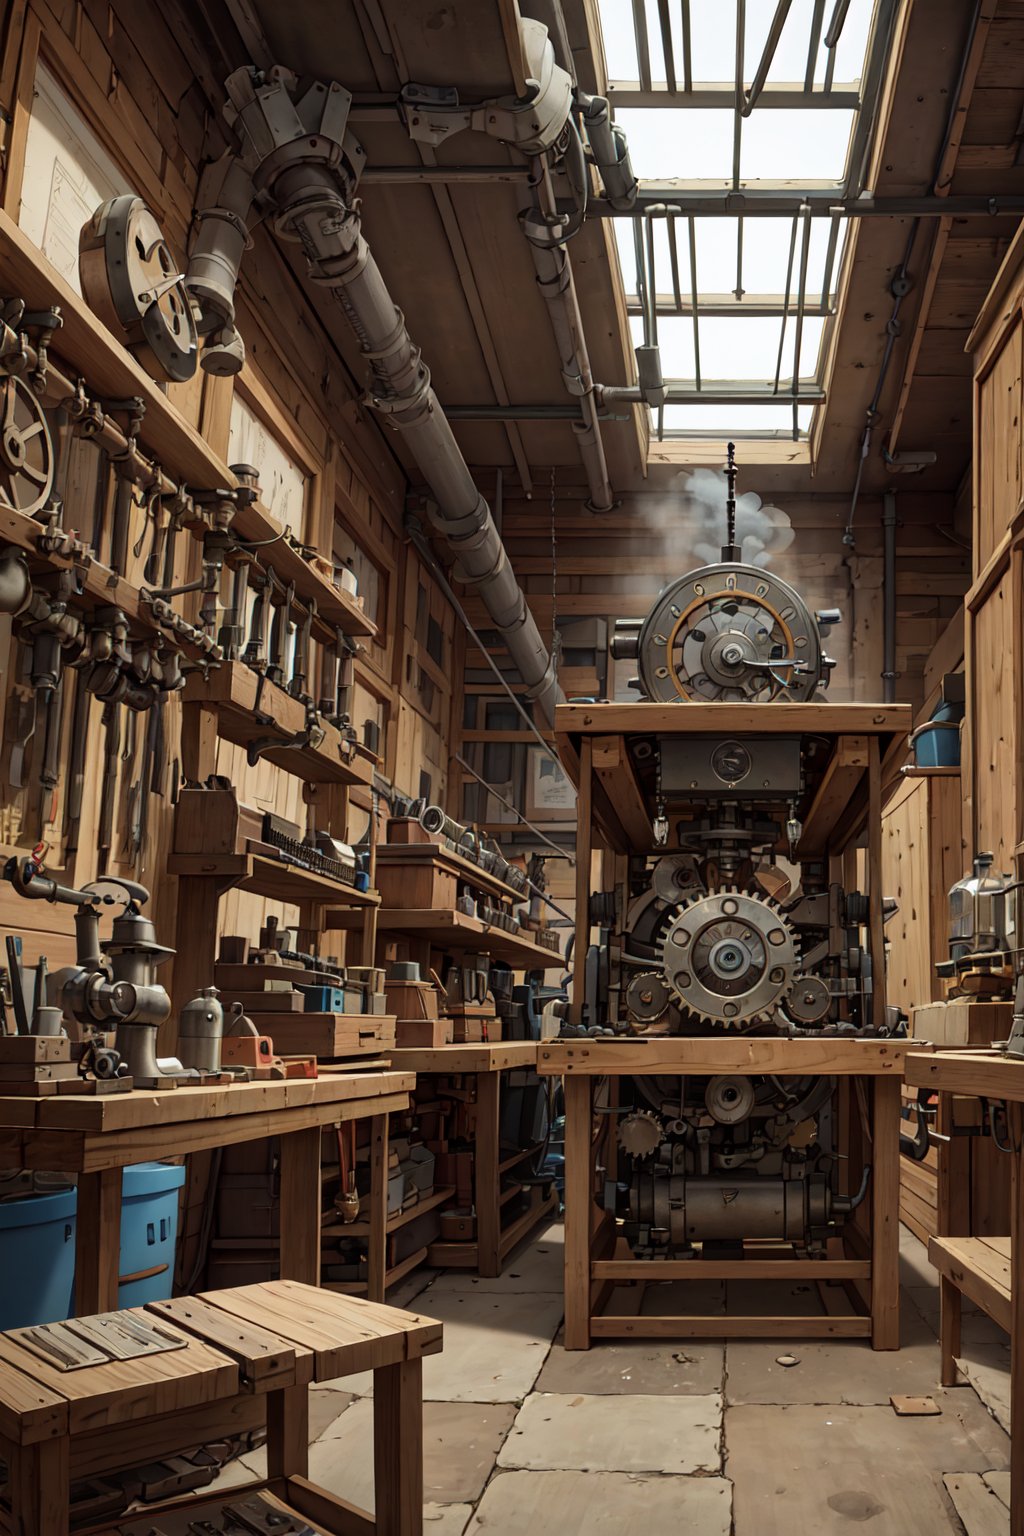 Steampunk of an inventor's workshop,  with intricate machines,  gears and steam engines